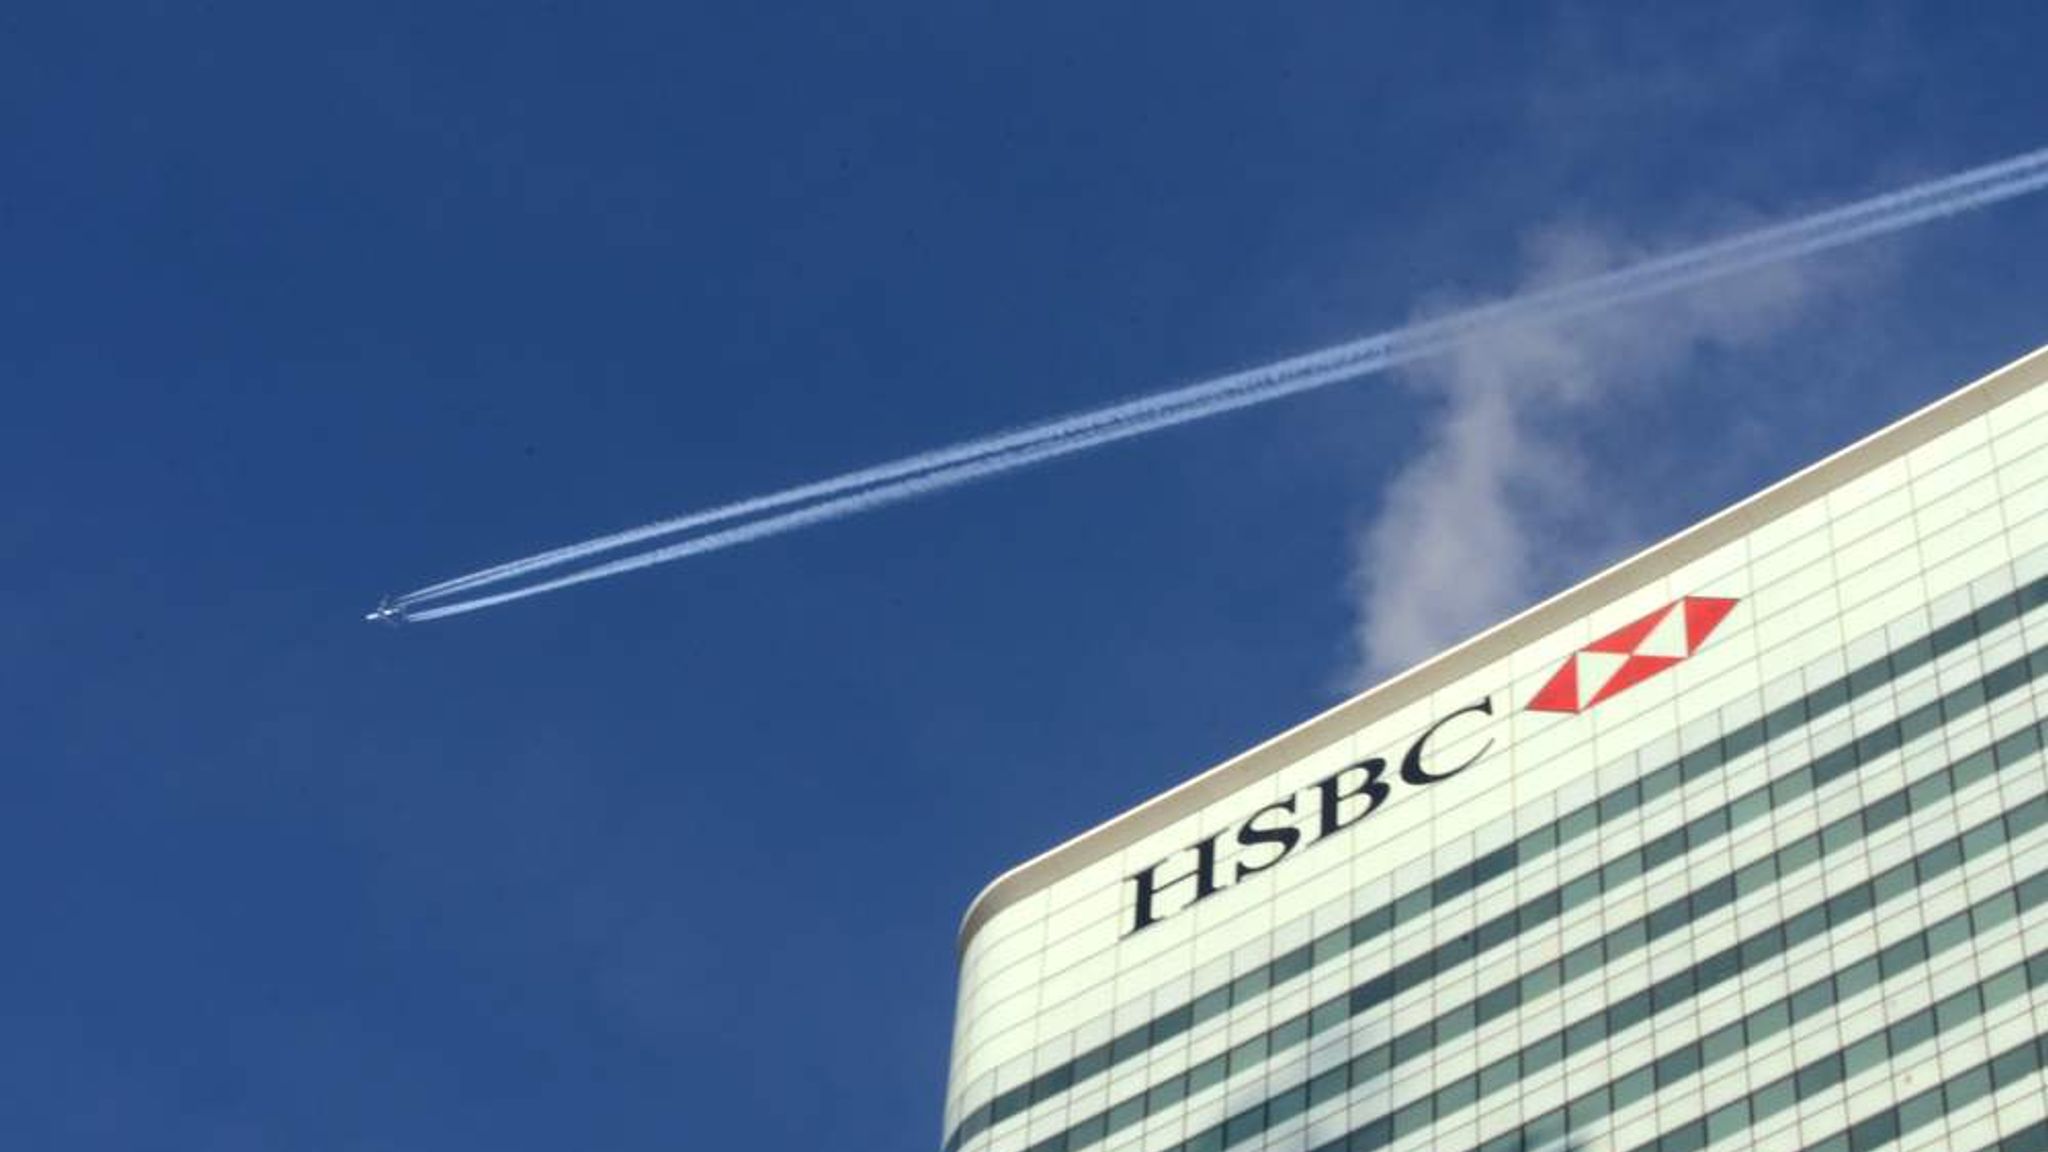 Hsbc Directors Quit In Protest At Jail Threat Business News Sky News 7117